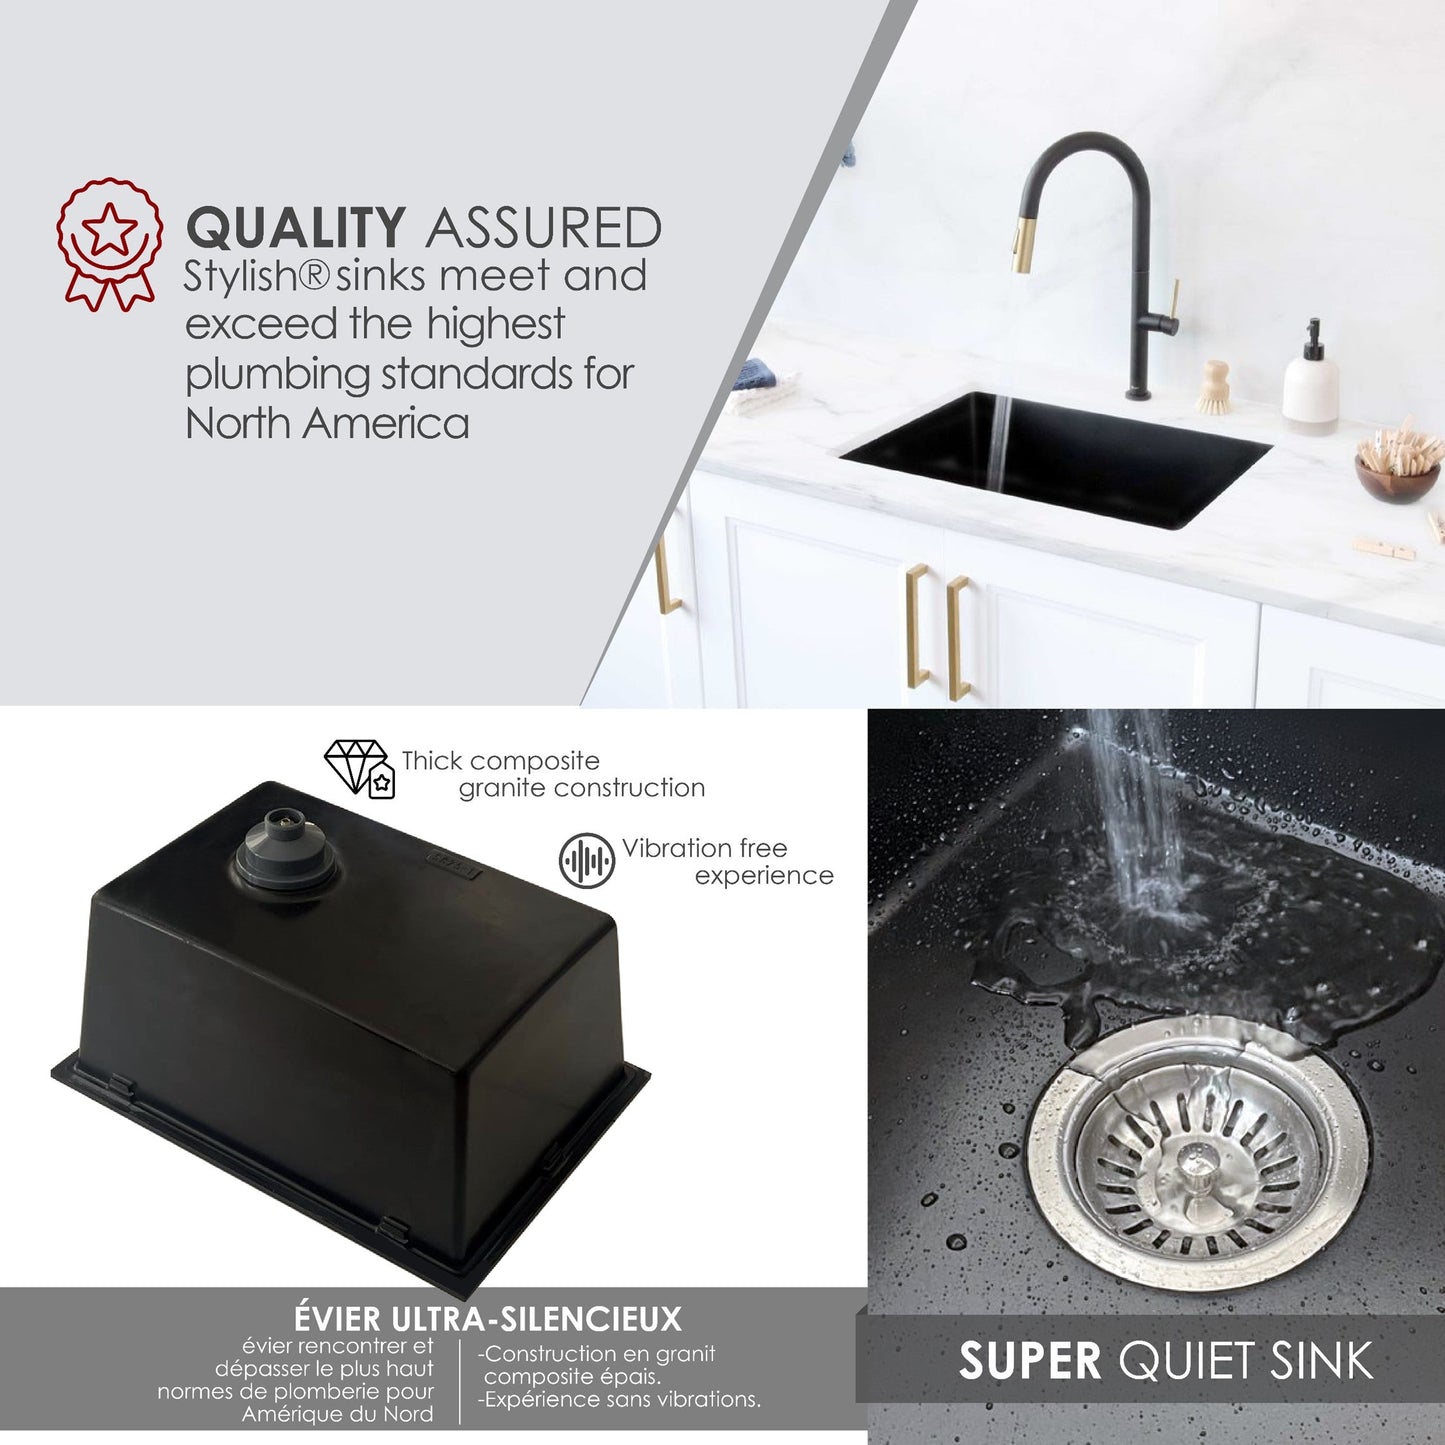 Stylish Black Dual Mount Single Bowl Composite Granite Laundry Sink With Strainer